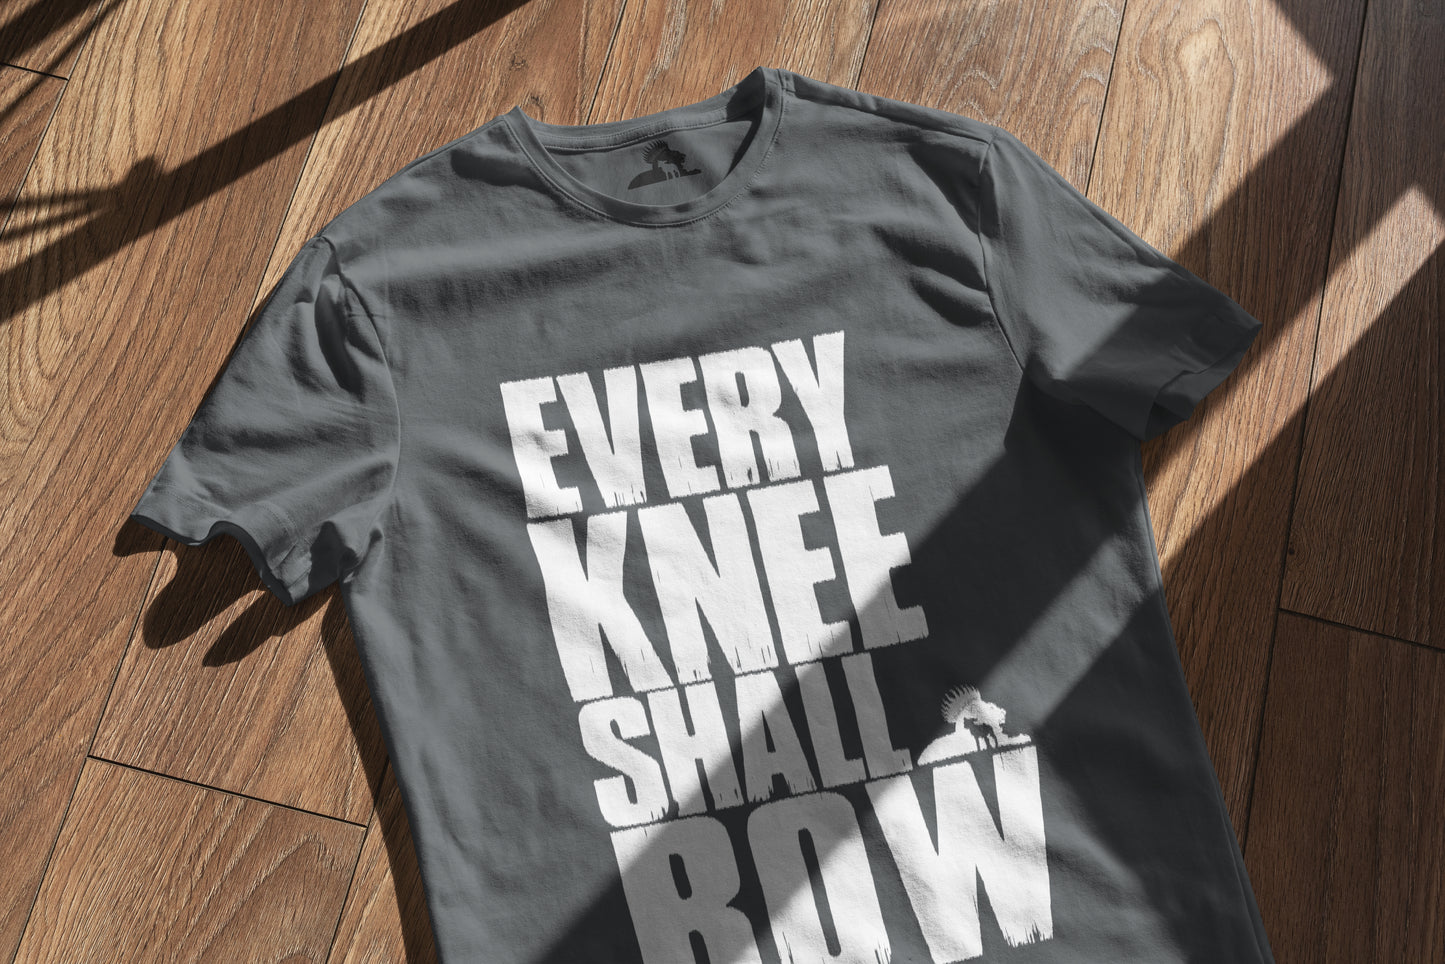 Every Knee Shall Bow - Men T-Shirt